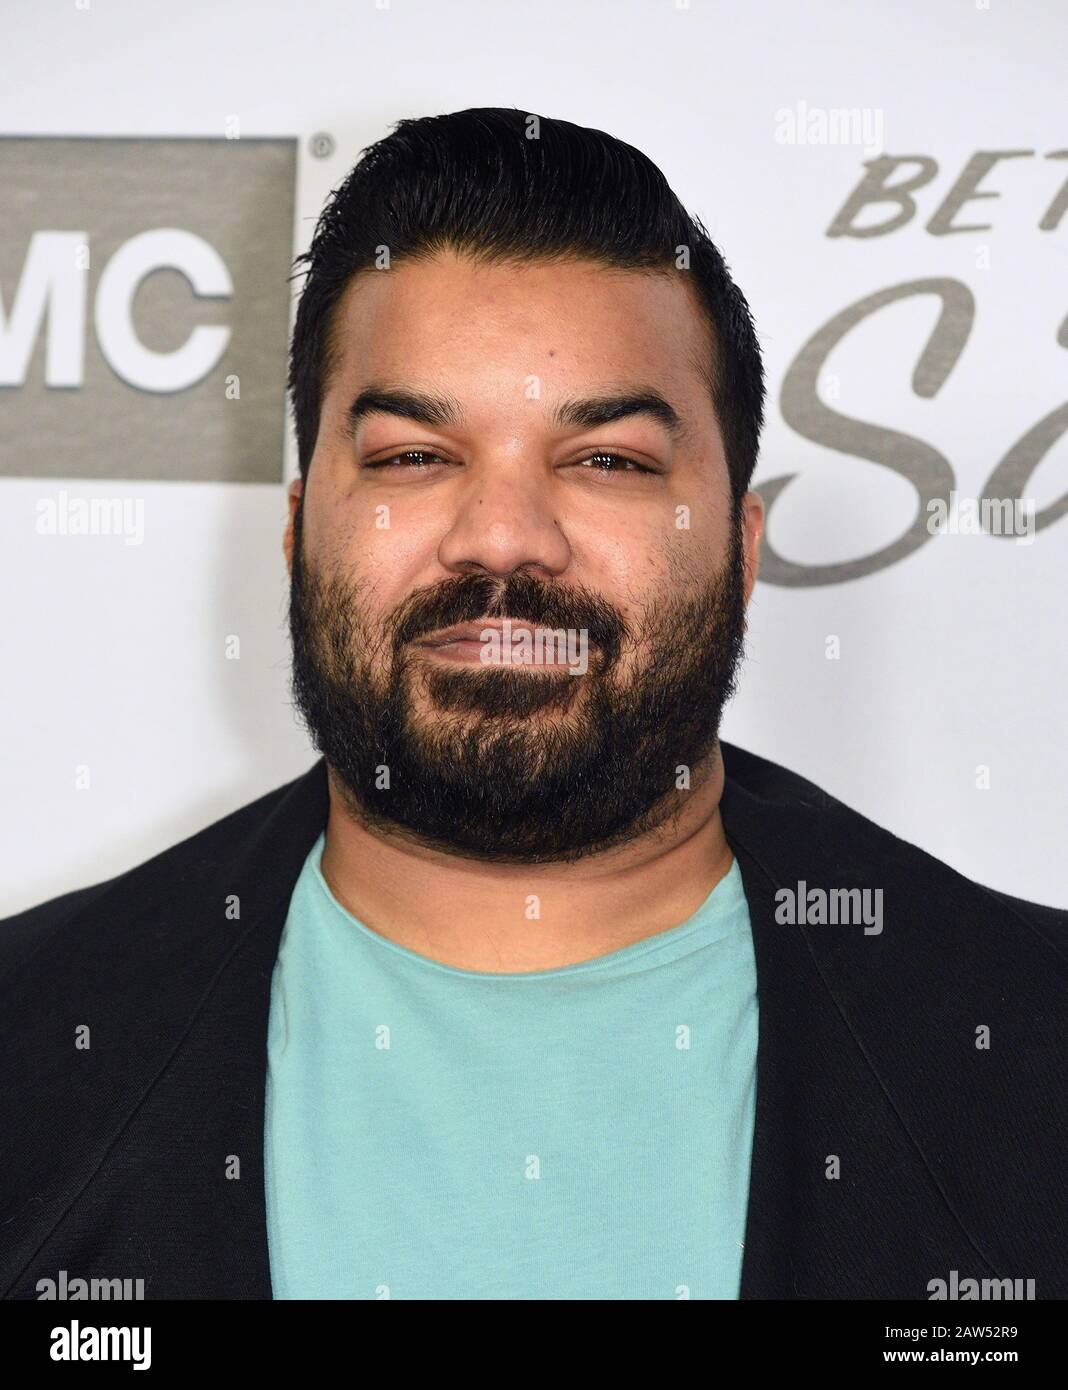 HOLLYWOOD, CALIFORNIA - FEBRUARY 05: Adrian Dev attends the premiere of AMC's 'Better Call Saul' Season 5 at ArcLight Cinemas on February 05, 2020 in Hollywood, California. Photo: Annie Lesser/imageSPACE/MediaPunch Stock Photo